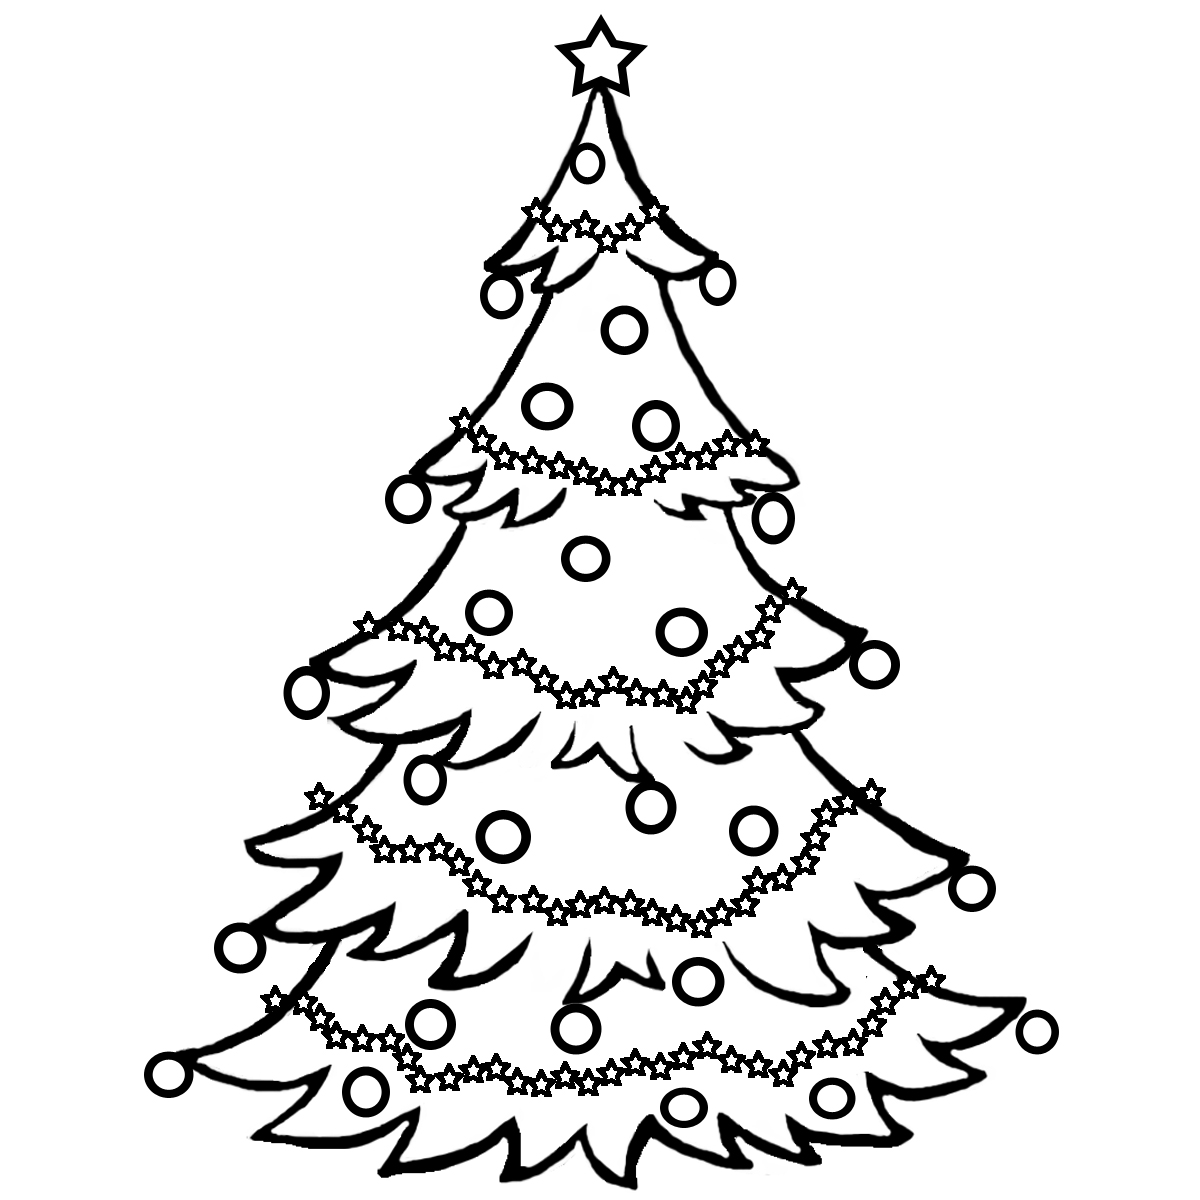 Christmas trees clipart black and white - ClipartFox